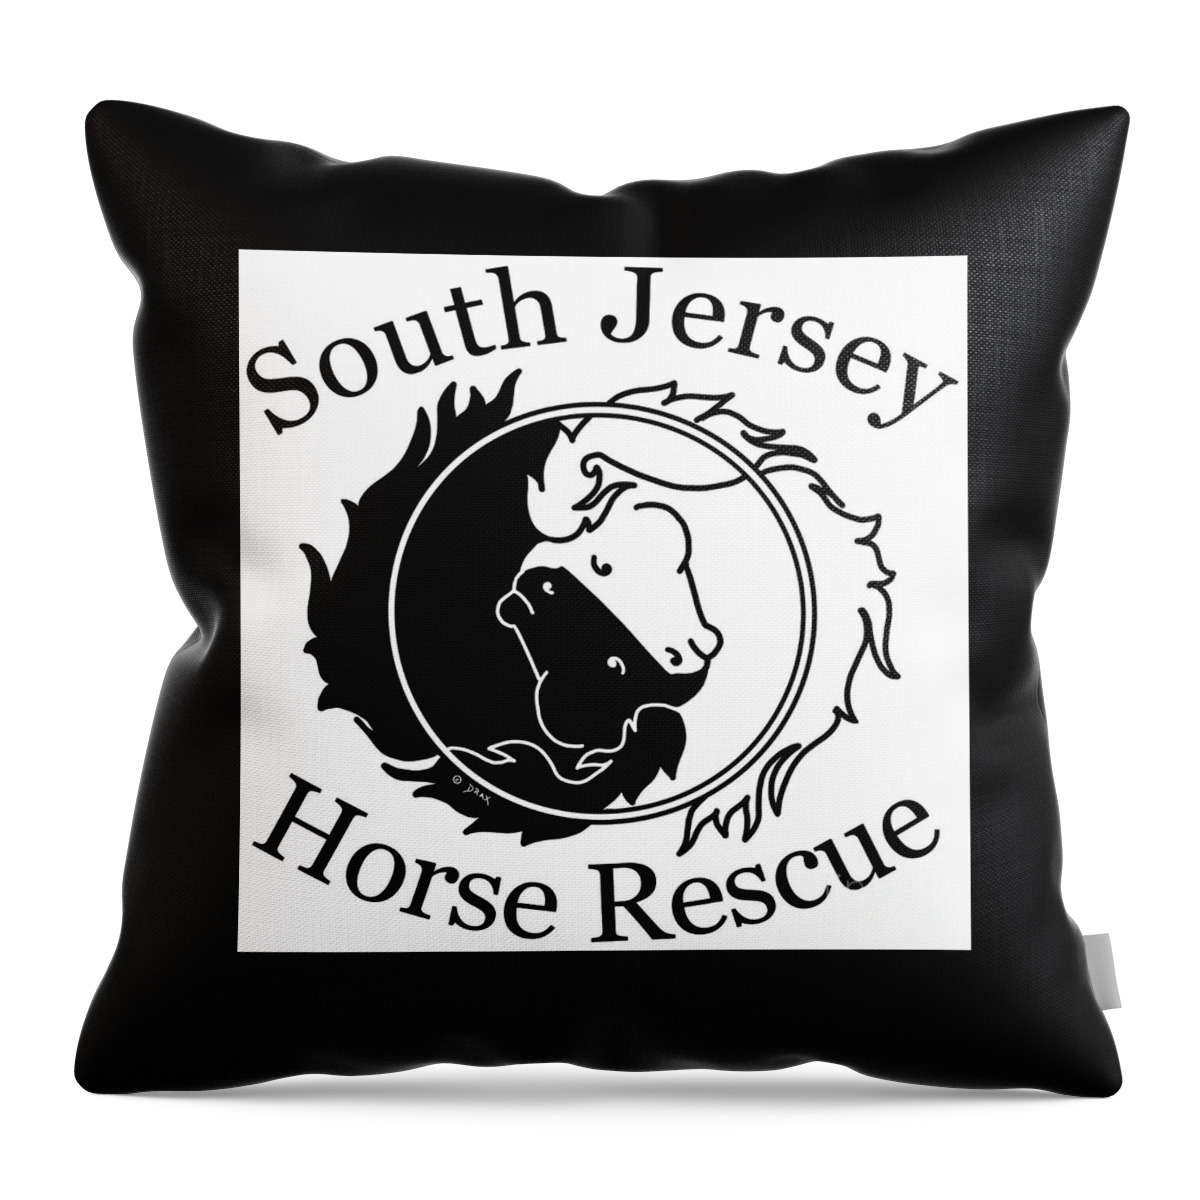 South Jersey Horse Rescue Throw Pillow featuring the digital art South Jersey Horse Rescue by Gail Maguire